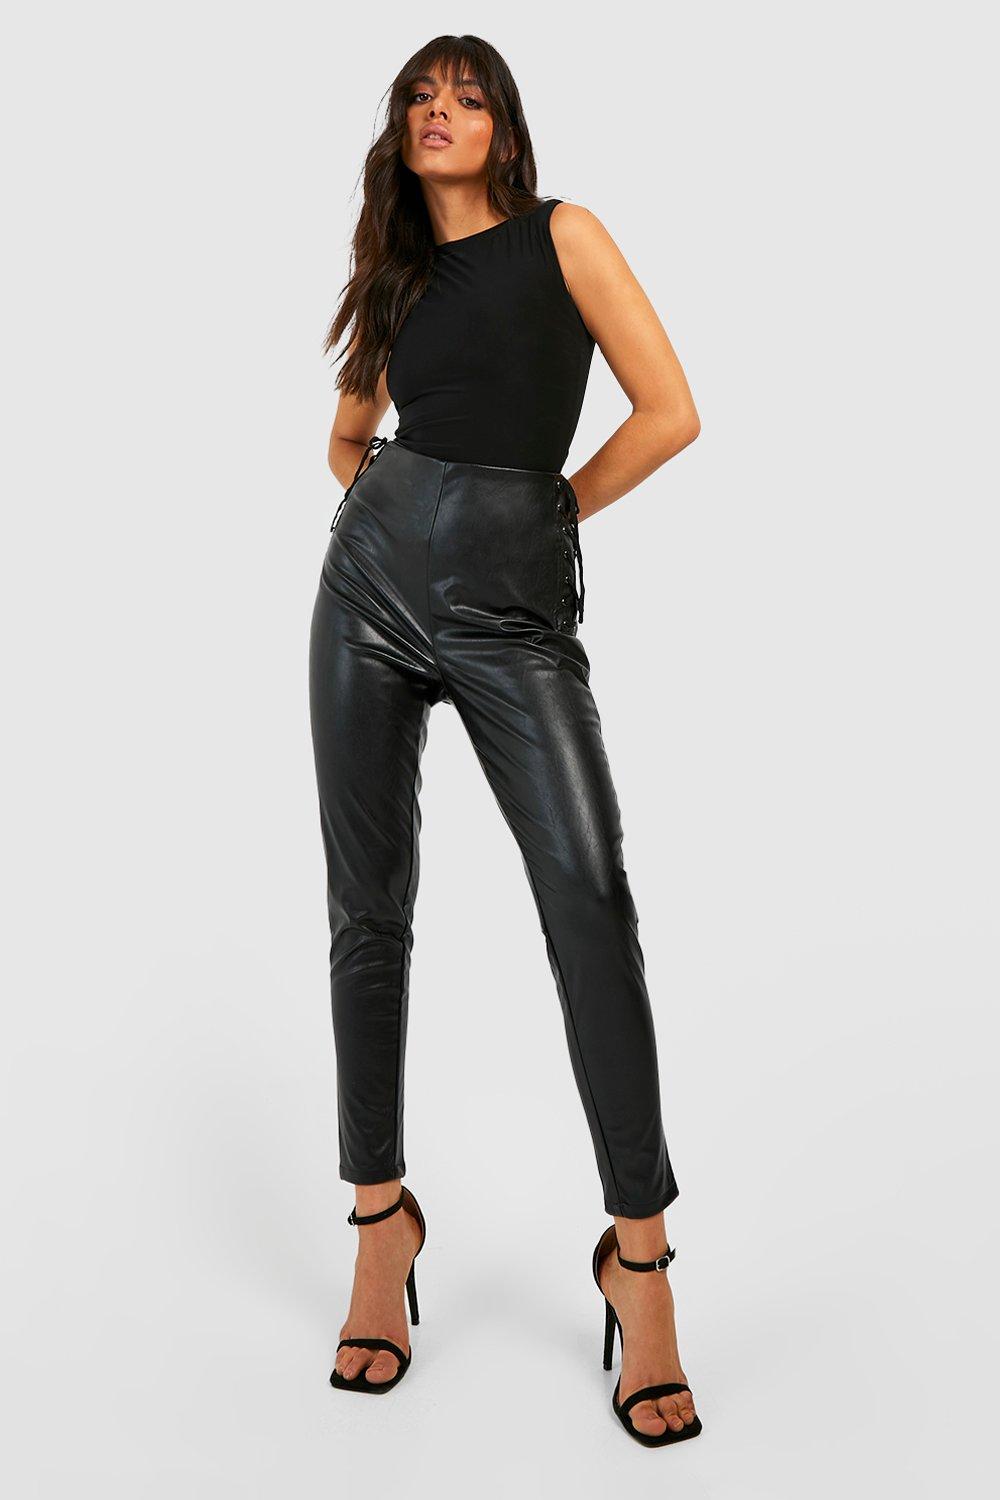 Women's High Waisted Lace Up Leather Look Trousers